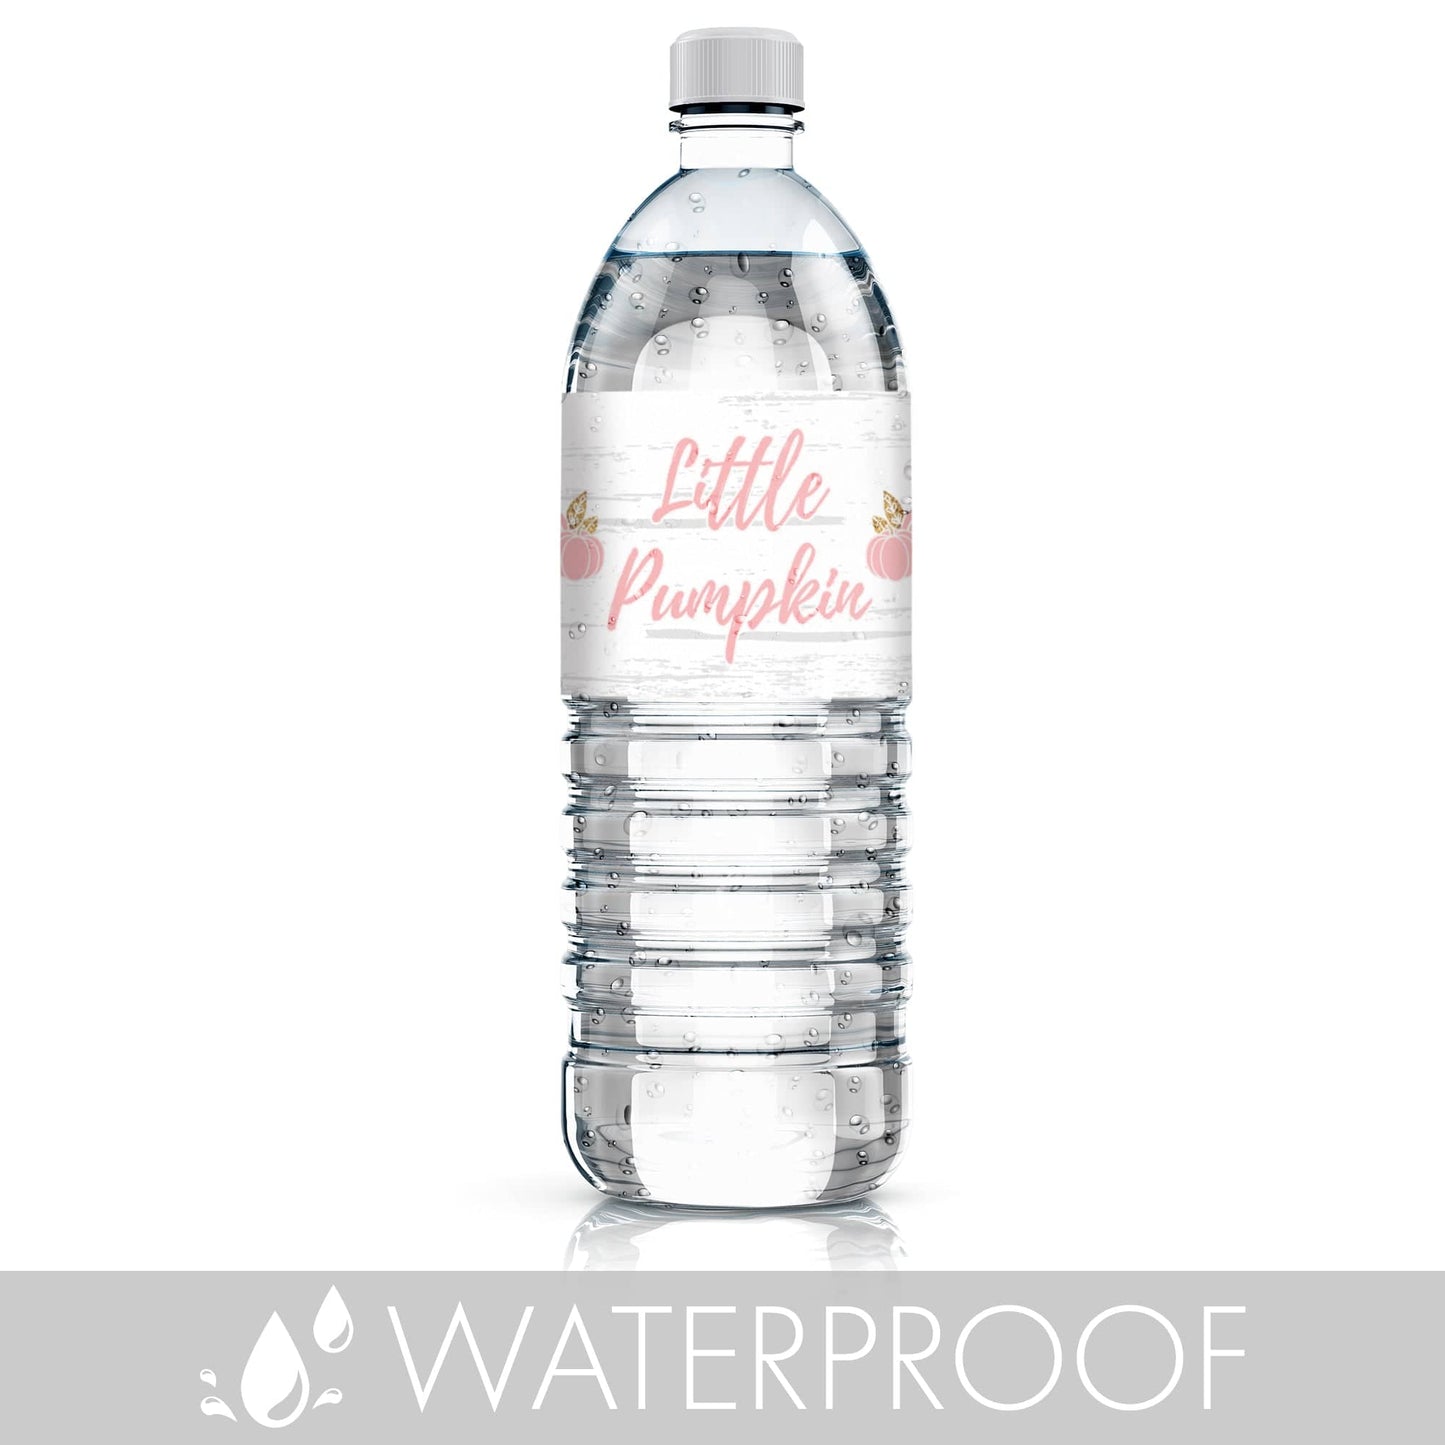 Pink and Gold Little Pumpkin Water Bottle Labels - 24 Stickers